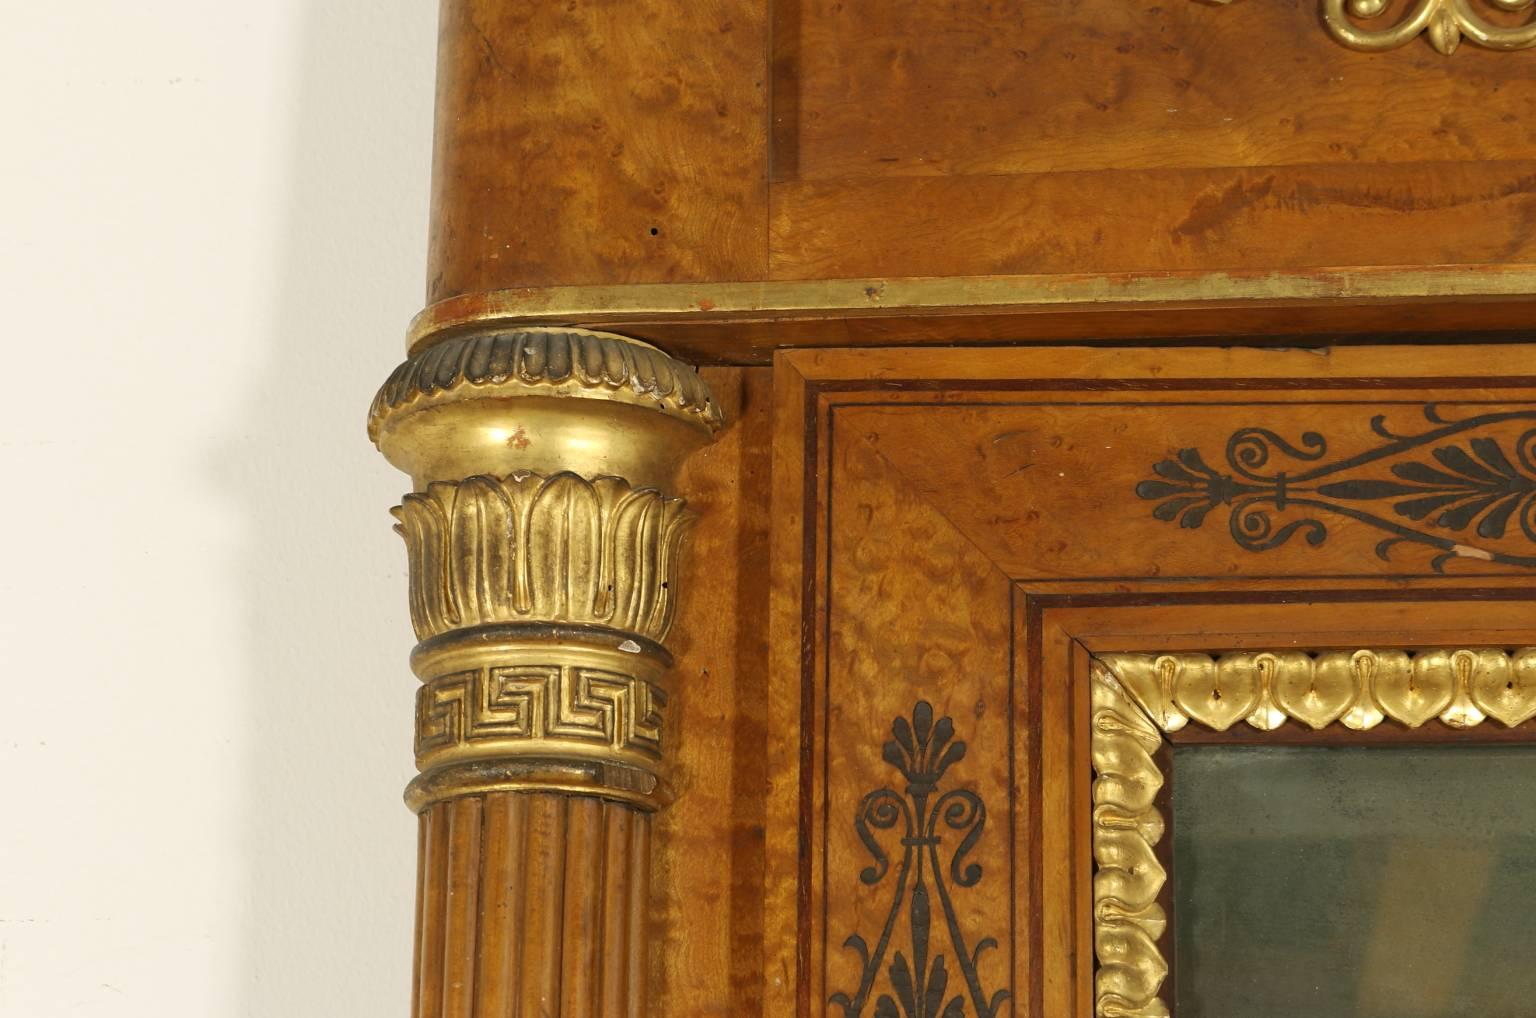 A maple mirror of the Restoration period with stiles, columns decorated with gilded capitals. Plaster inlaid edges and frames. Amaranth decorations. French mirror with gilded frame. A band with sophisticated gilded carvings. Made in Piemonte